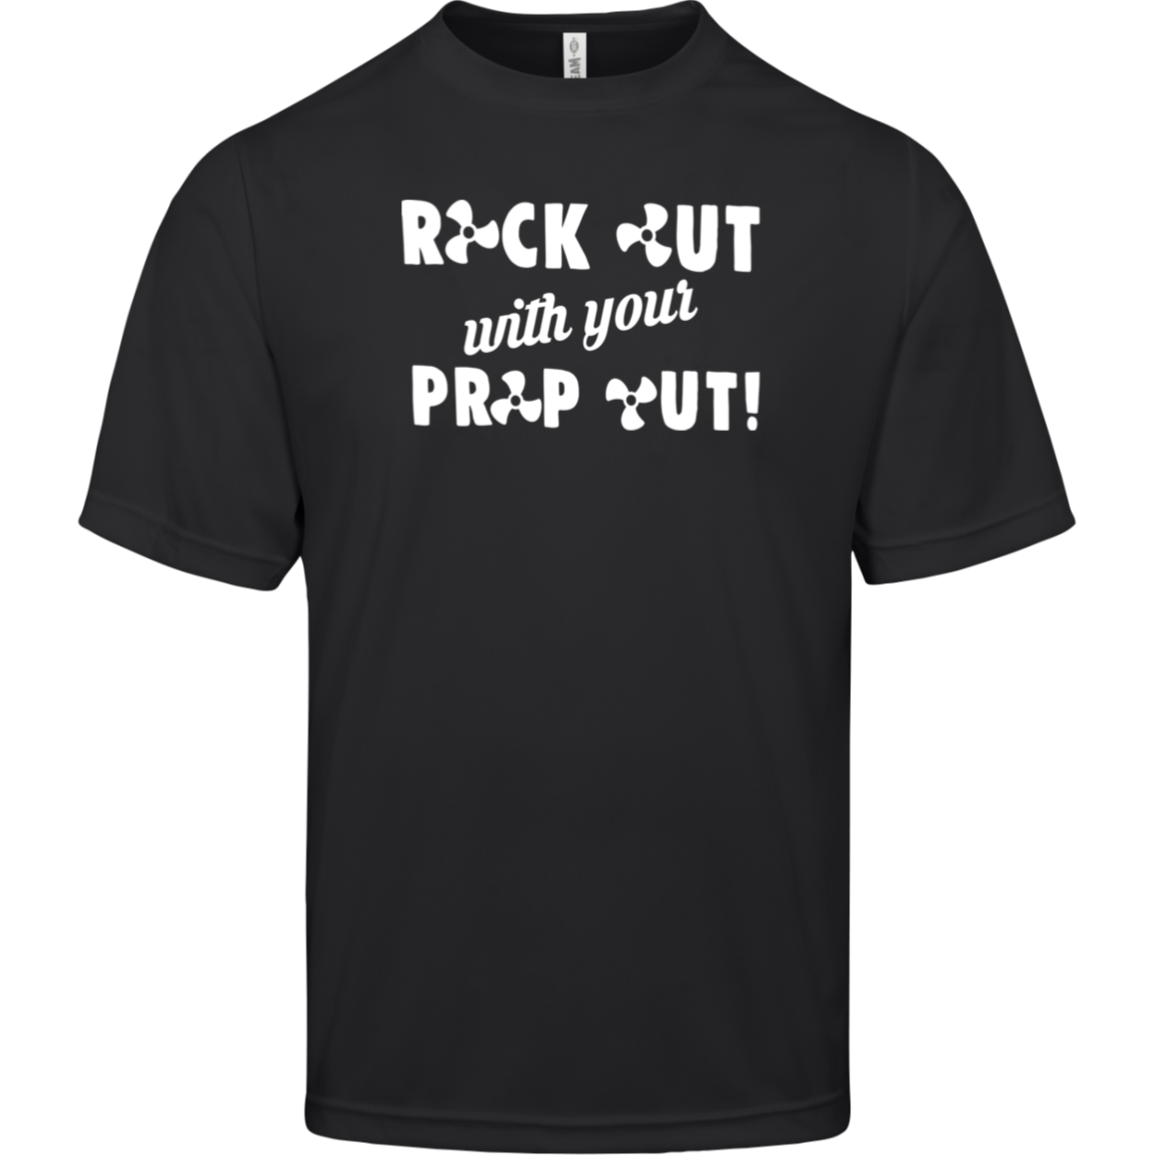 ***2 SIDED***  HRCL FL - Rock Out with your Prop Out - - 2 Sided - UV 40+ Protection TT11 Team 365 Mens Zone Tee